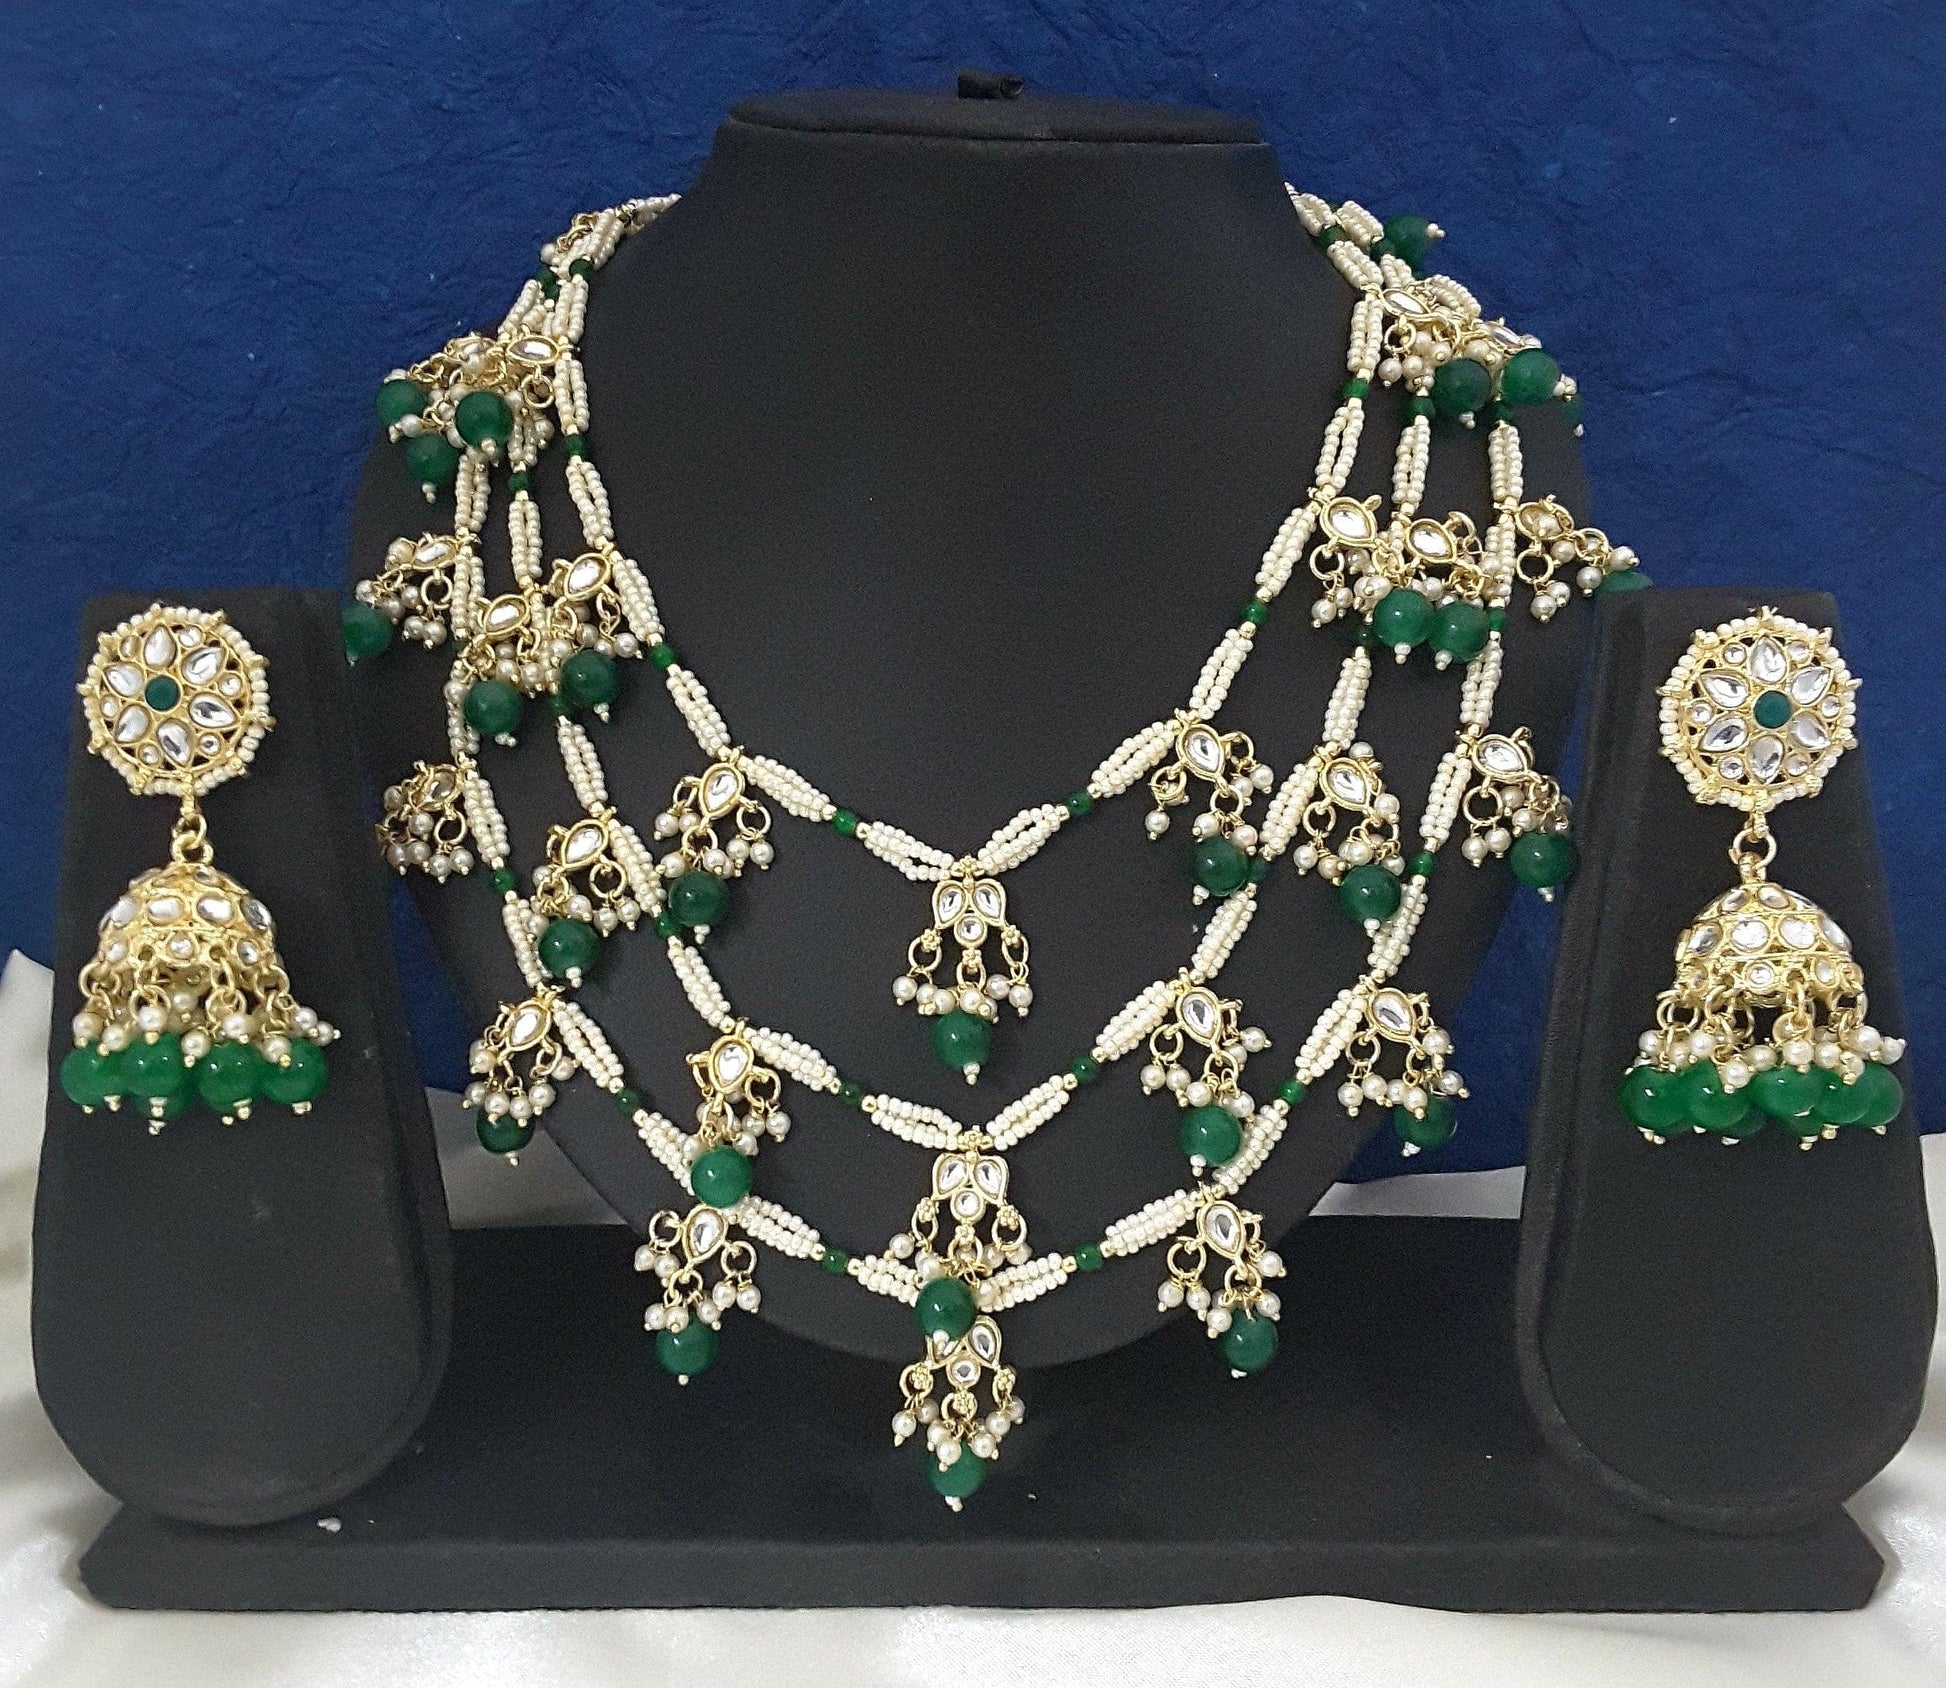 Moonstruck Traditional Indian White Kundan and Emerald Green Beads Long Regal Necklace Earring Set for Women(Emerald Green) - www.MoonstruckINC.com